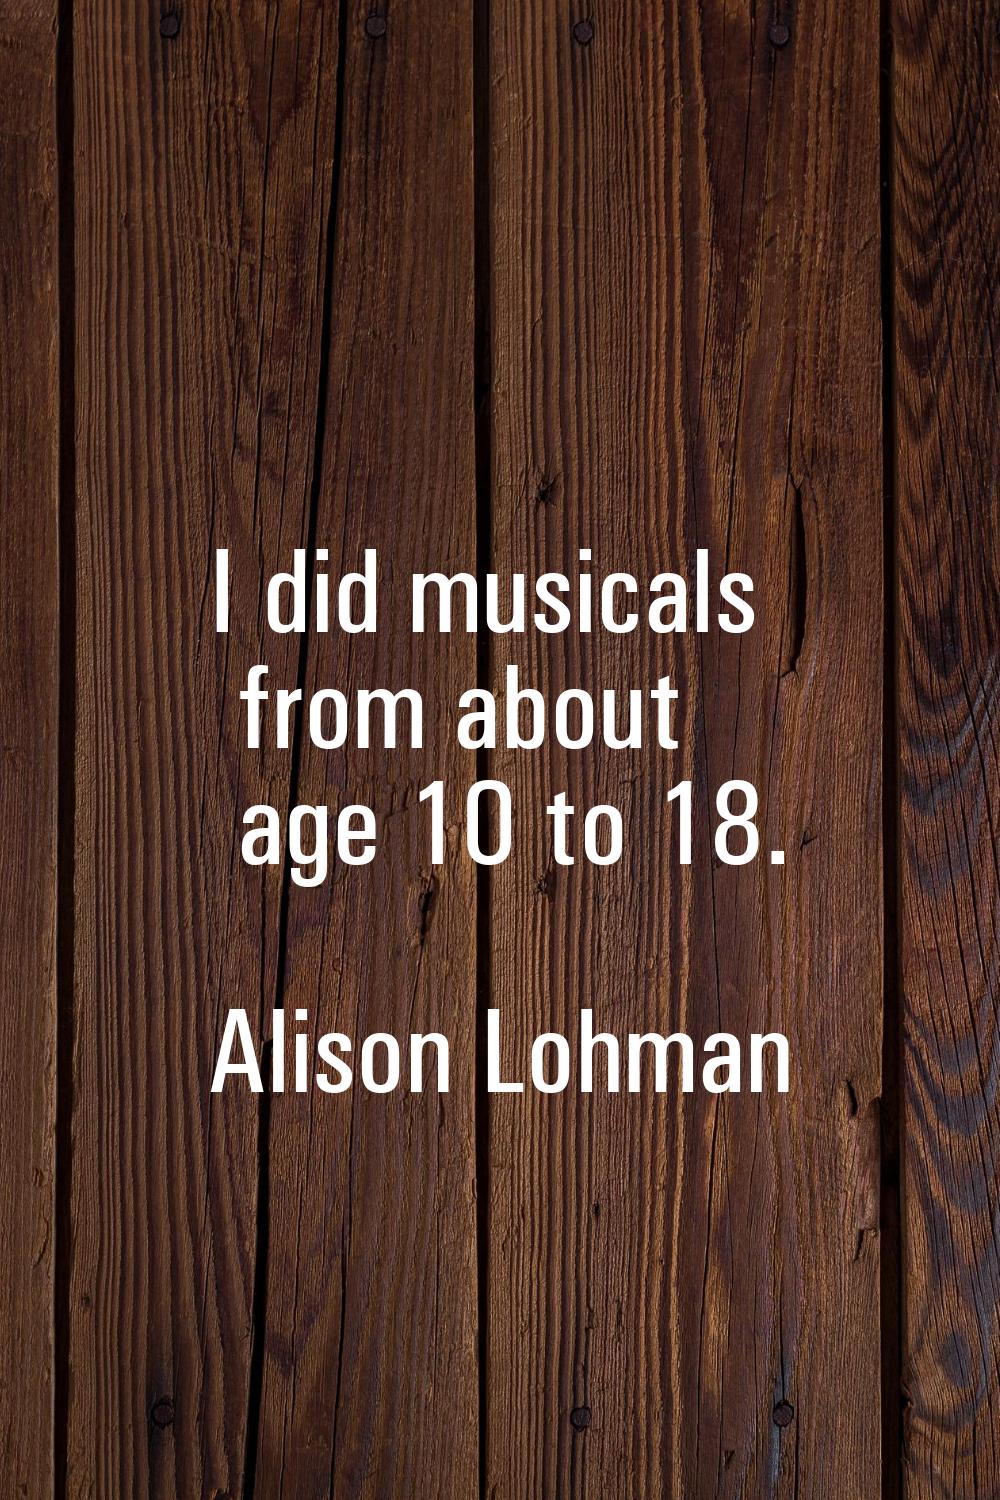 I did musicals from about age 10 to 18.